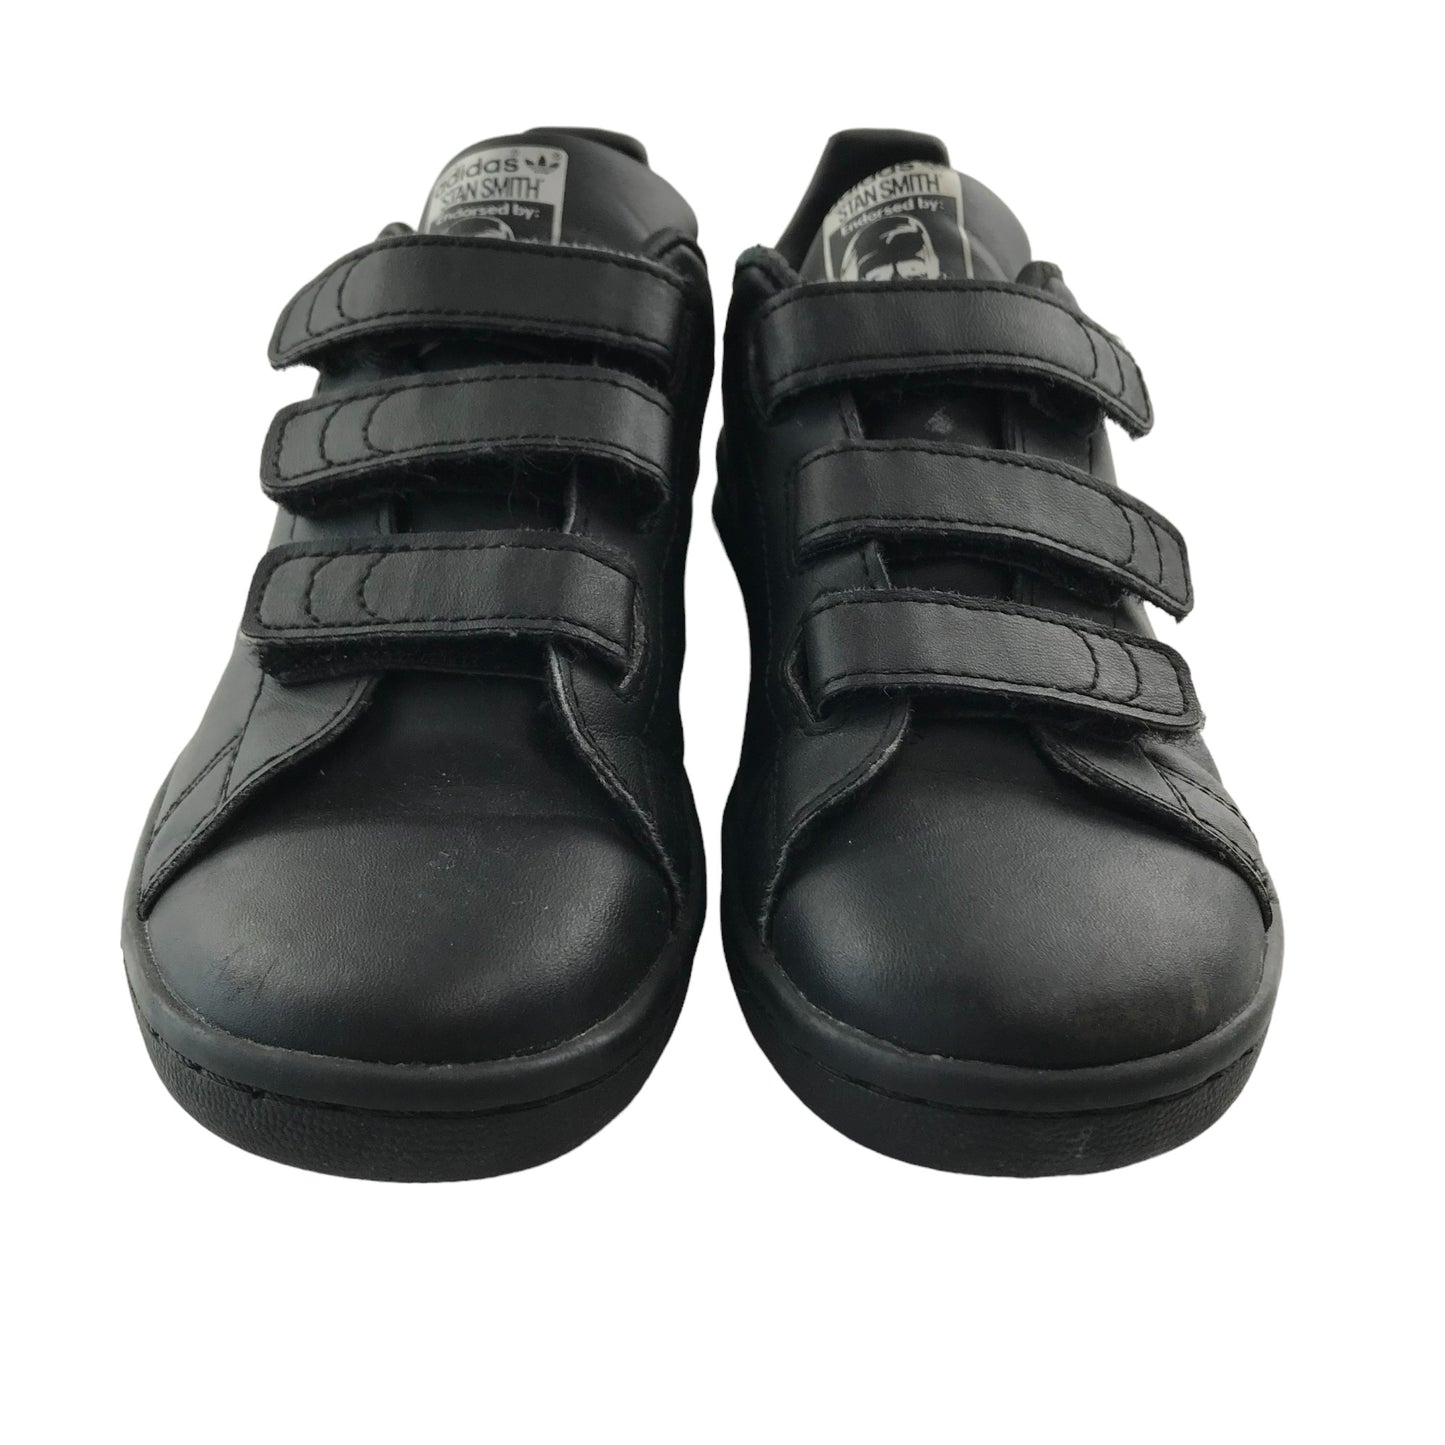 Adidas Stan Smith Trainers Shoe Size 13K Junior Black with Straps